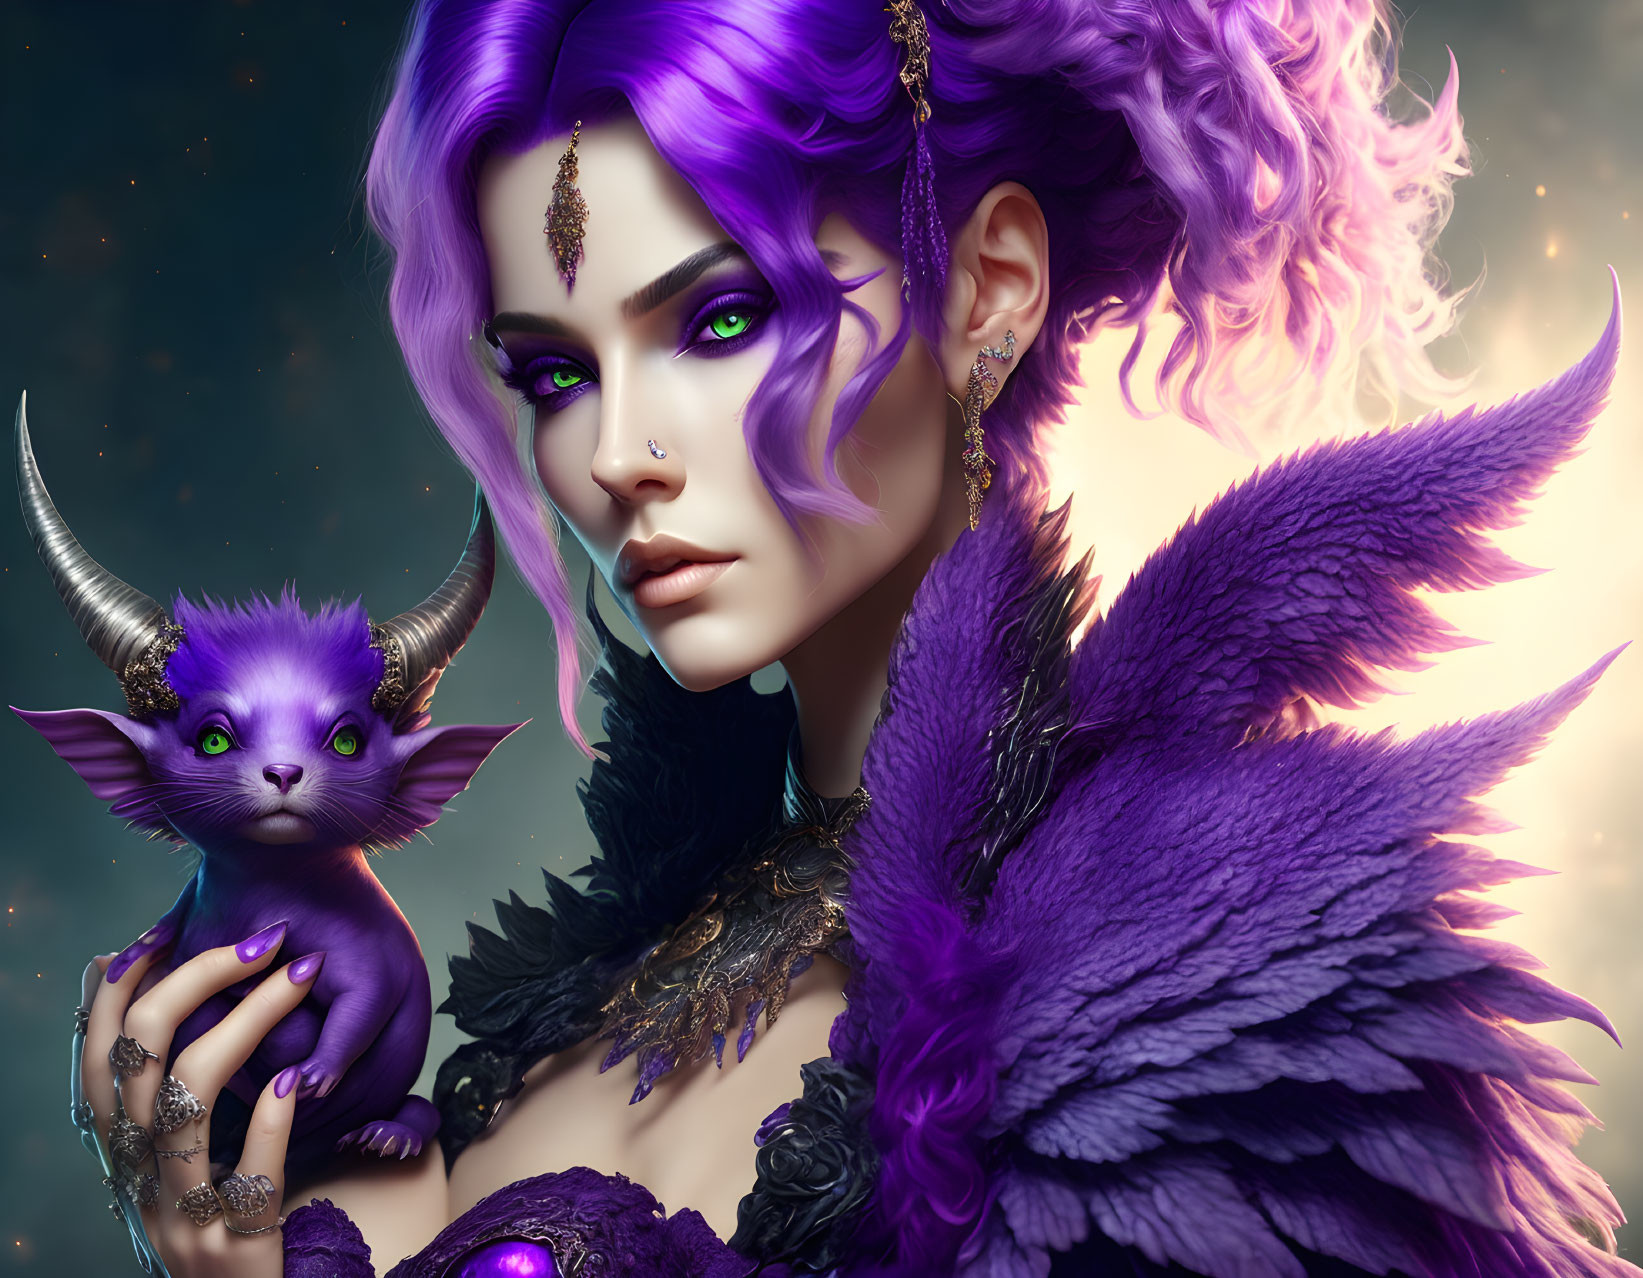 Purple-haired woman with pointed ears holding a horned creature in dark attire